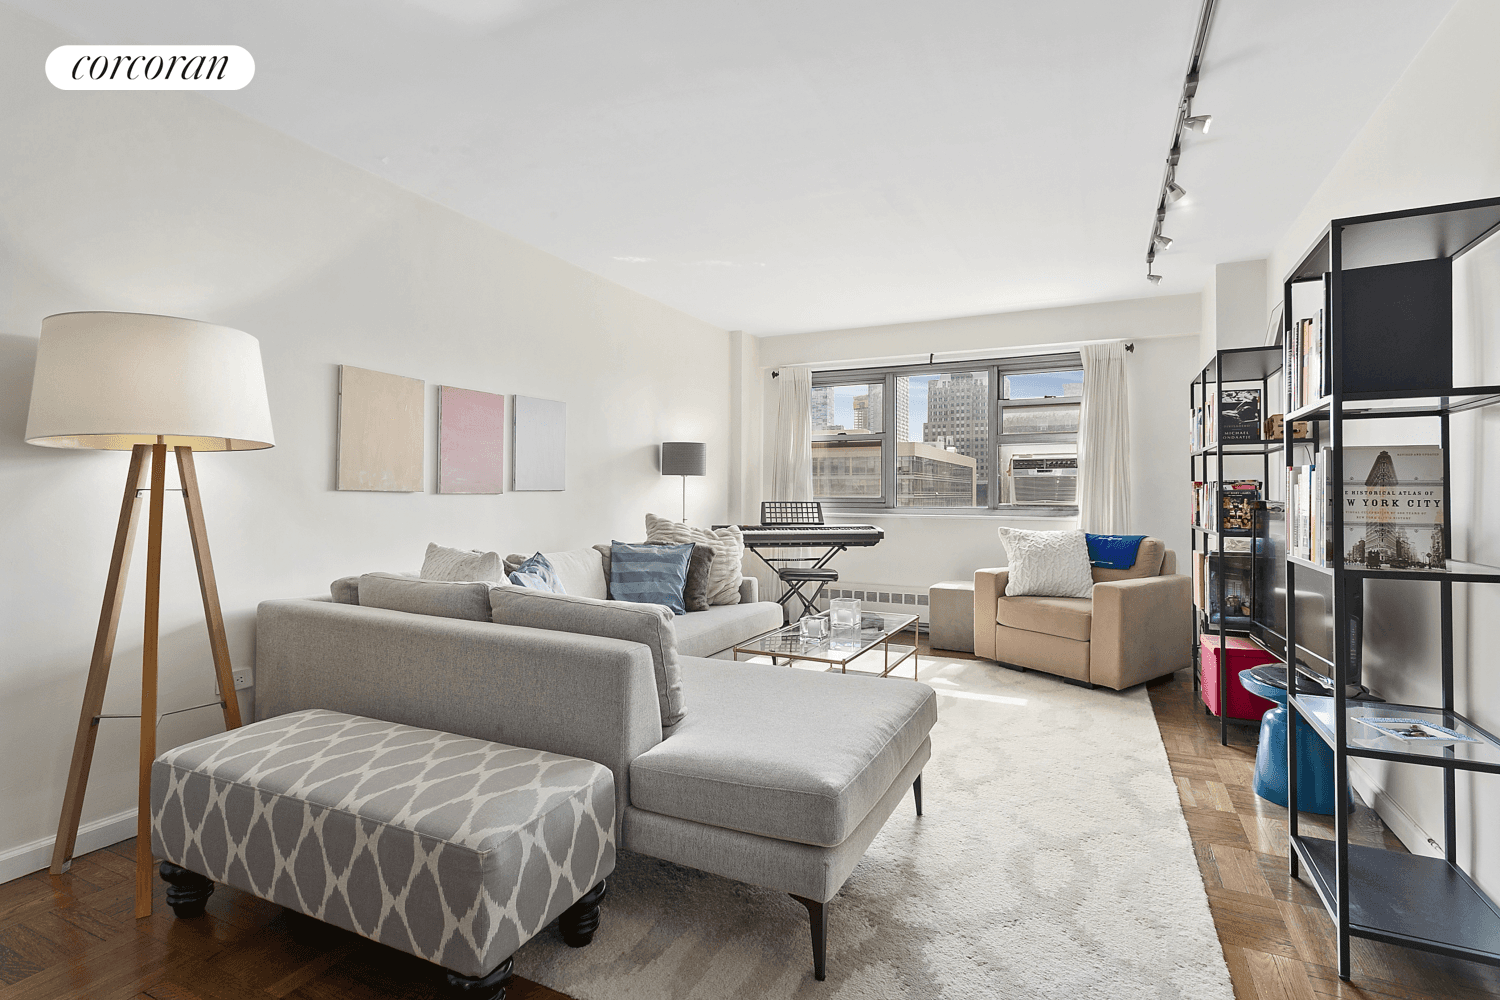 South facing, sun drenched, spacious 1 bedroom corner unit in Downtown Brooklyn's Concord Village.